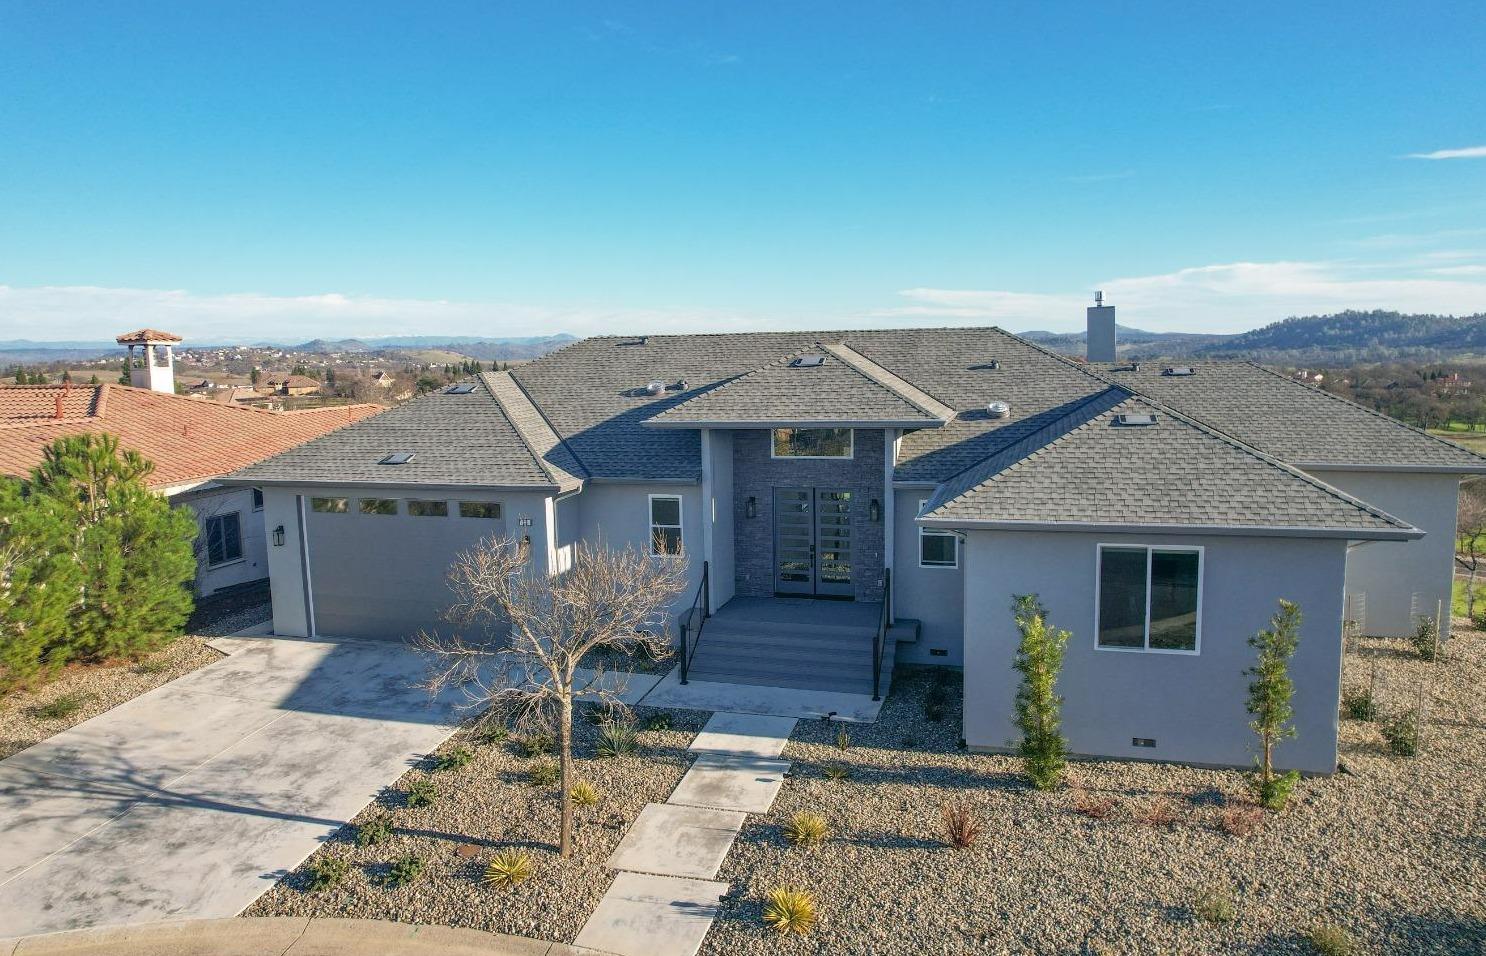 Photo of 23 Red Tail Ct in Copperopolis, CA